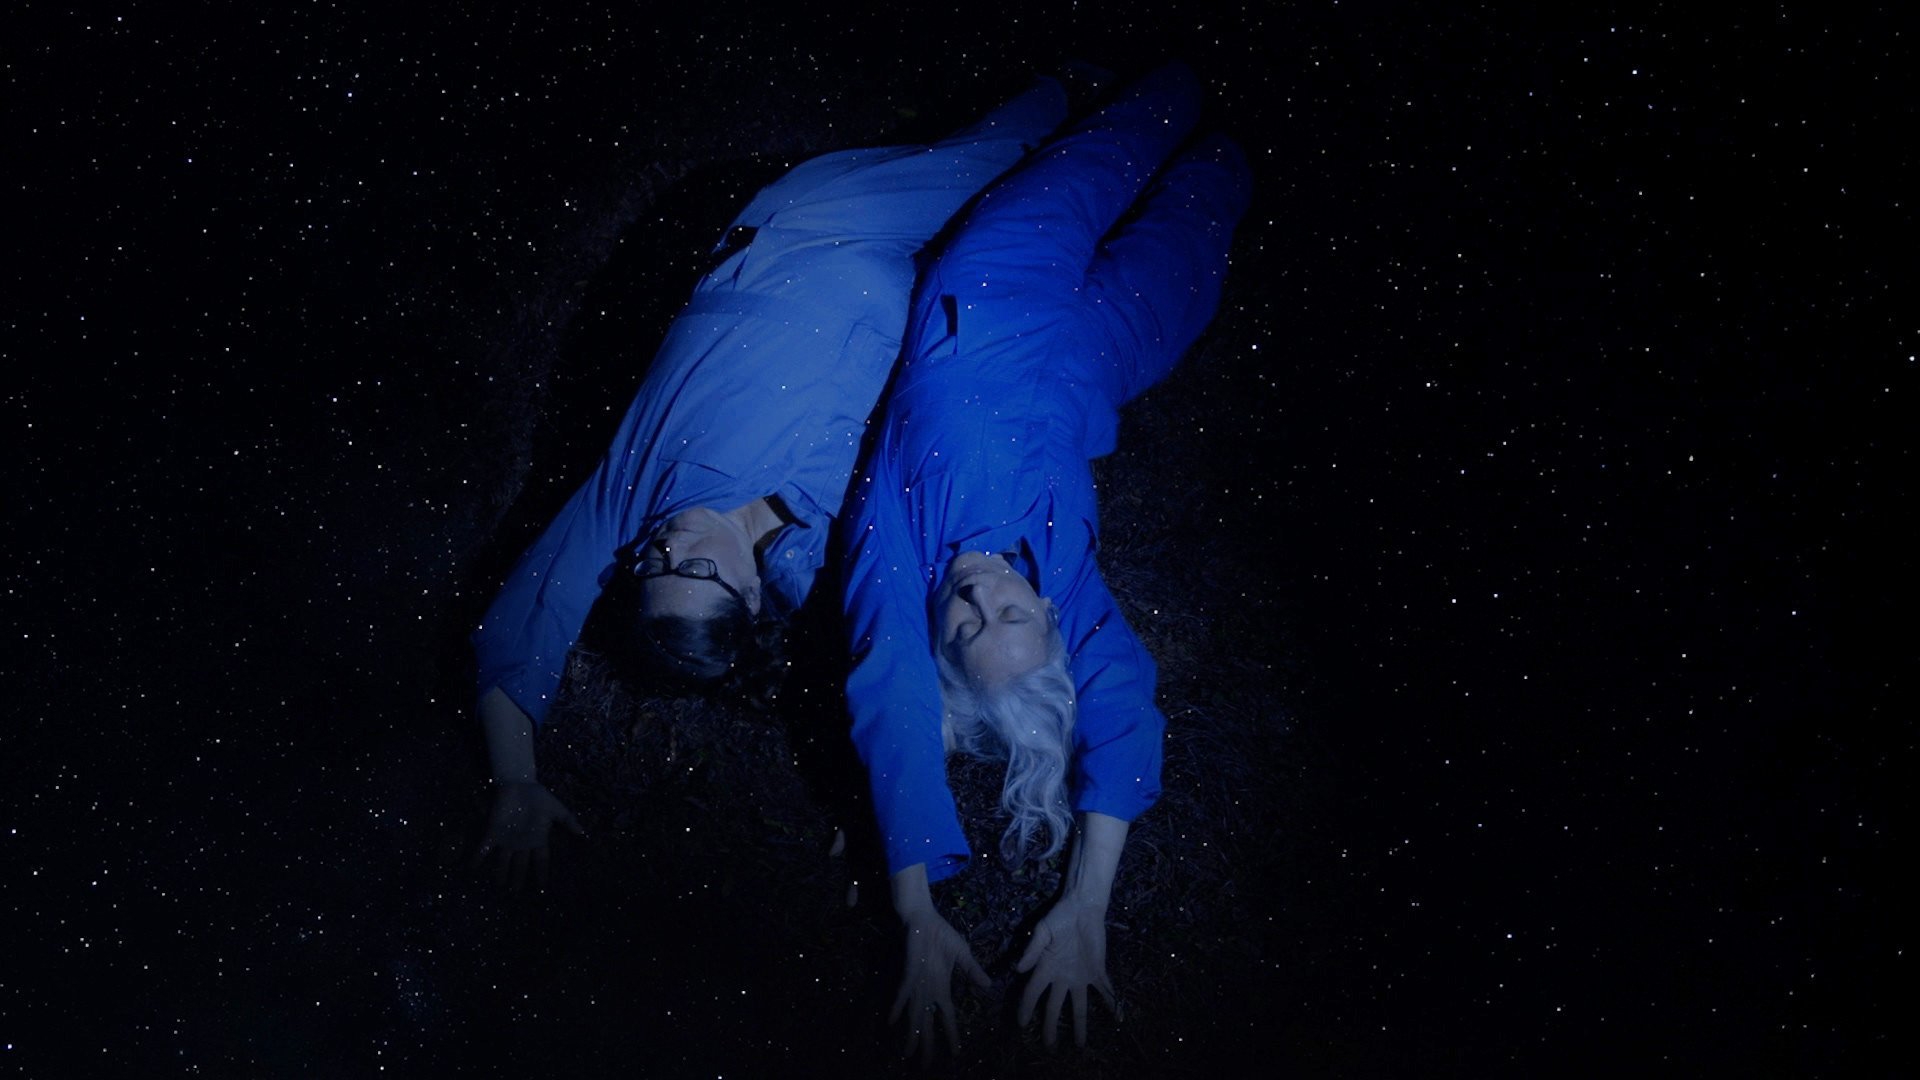 two people wearing blue jumpsuits lay back outstretched in the night sky filled with stars